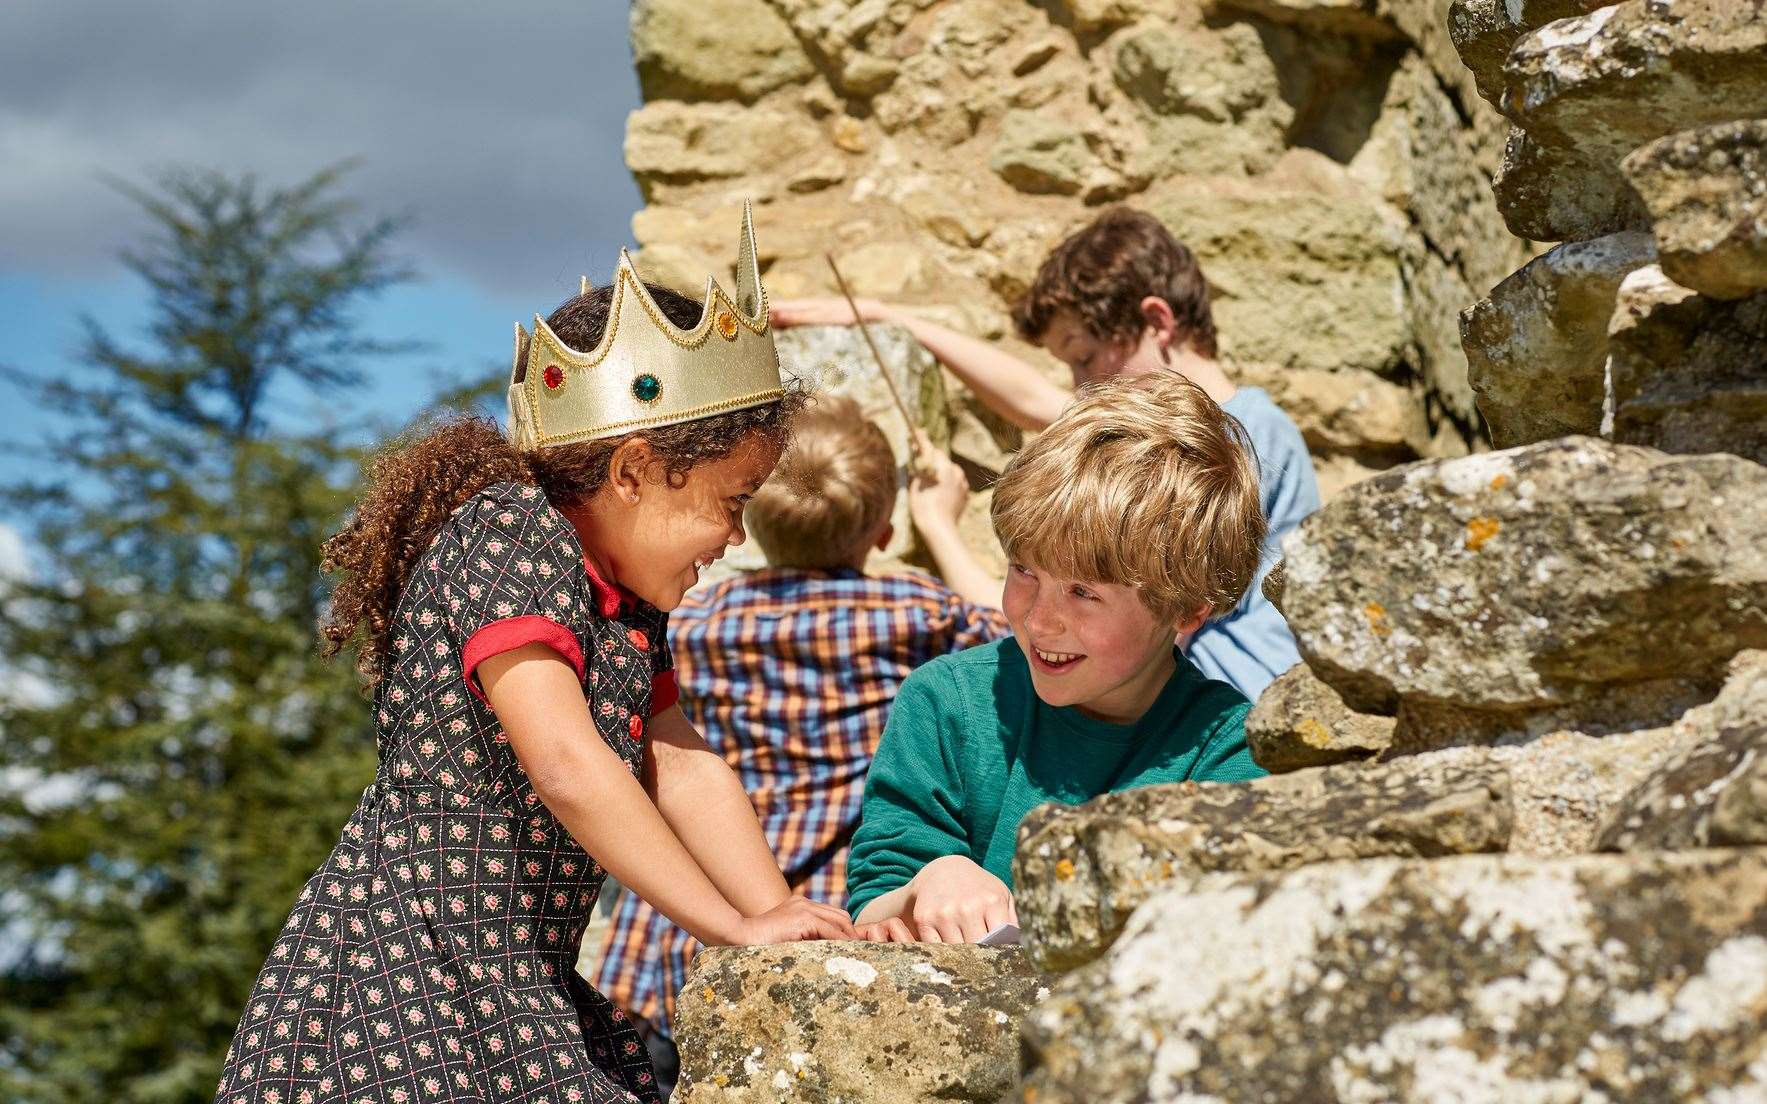 There are Easter quests on offer this holidays Picture: English Heritage